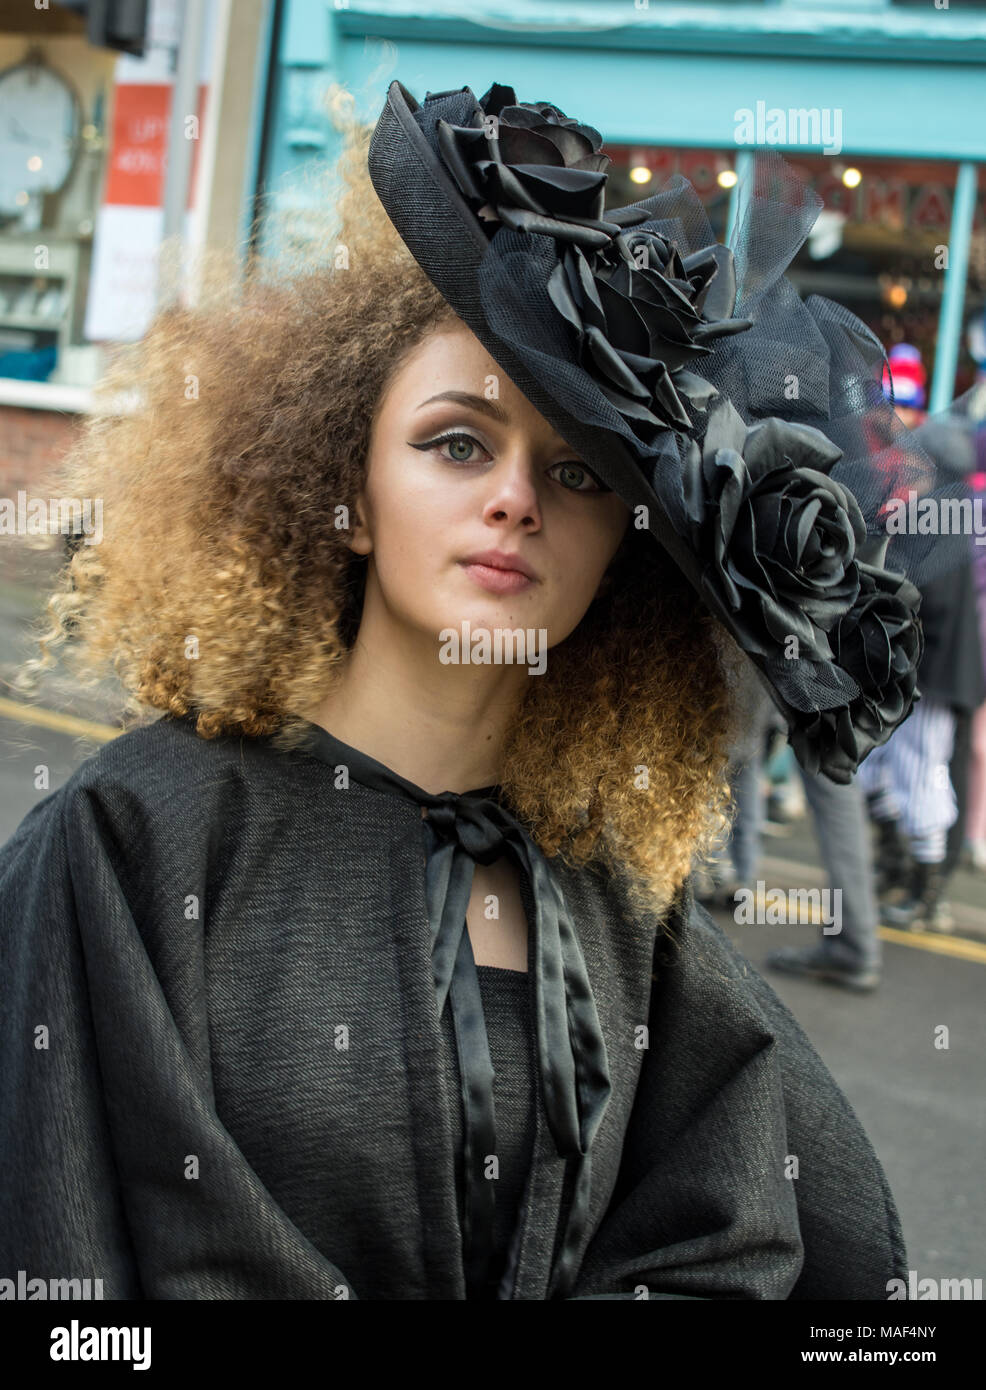 Participant in the Whitby Goth/Steampunk festival dressed in steampunk/goth costume at the Whitby Goth festival, Yorkshire, UK on October 28th 2017. Stock Photo